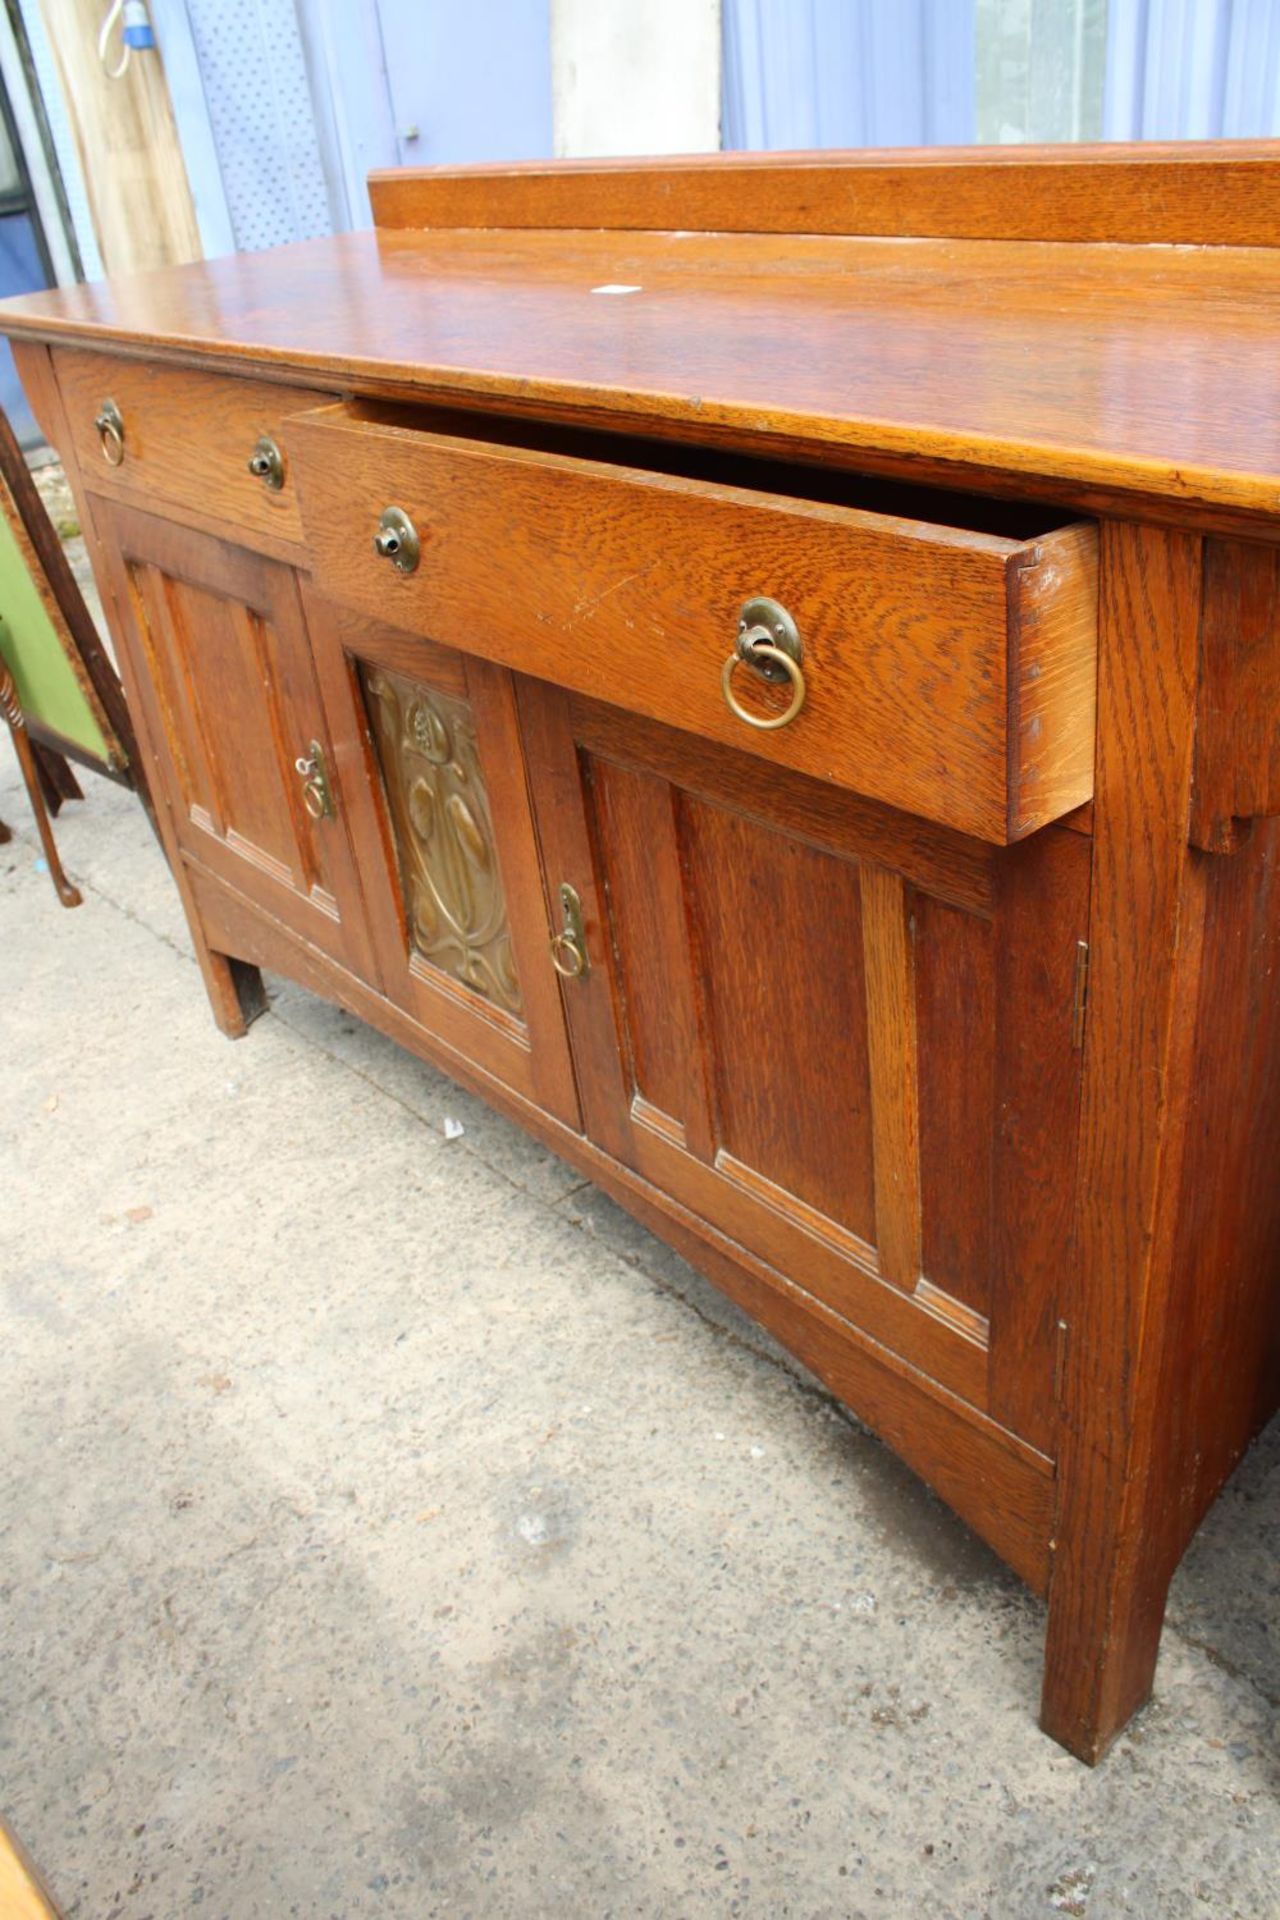 AN ART NOUVEAU OAK SIDEBOARD WITH CENTRAL EMBOSSED COPPER PANEL - 66" WIDE - Image 2 of 5